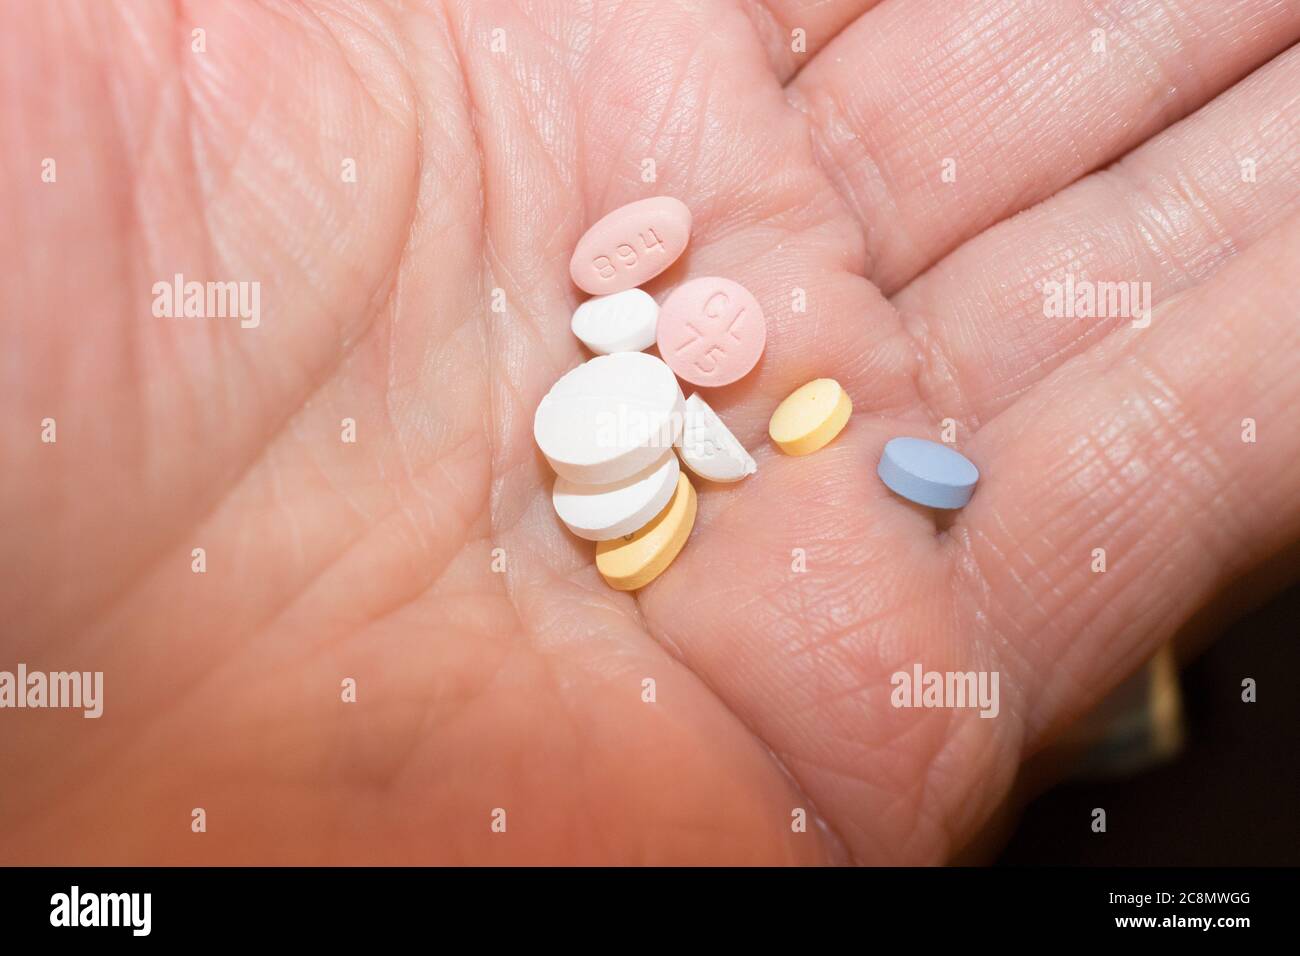 hand holding various pill medications model released (photographers, my hand) Stock Photo